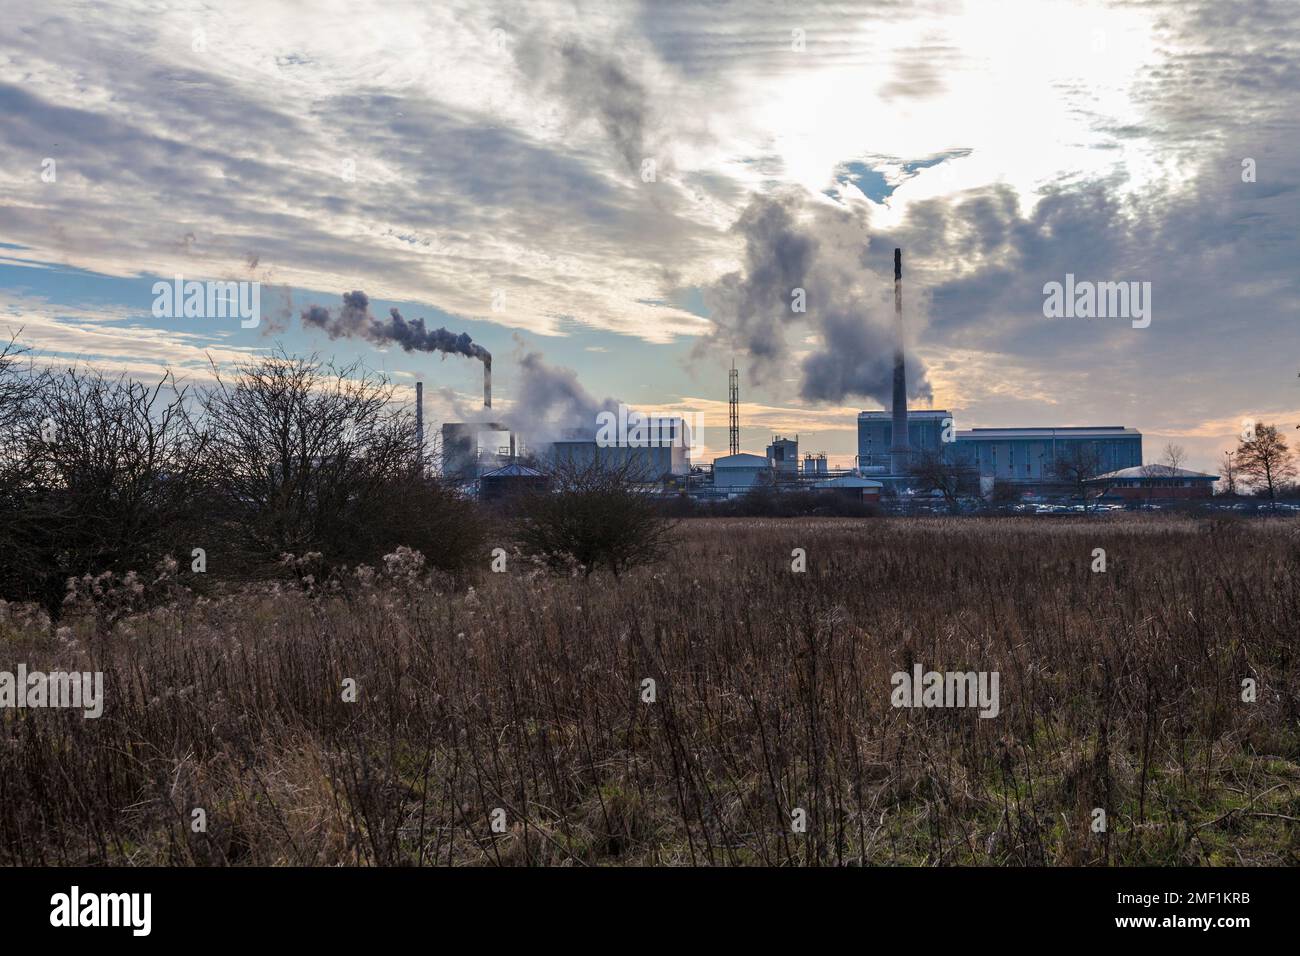 The smoking chimneys of the Venator  Materials factory at Greatham, Hartlepool.Pigment manufacturers Stock Photo